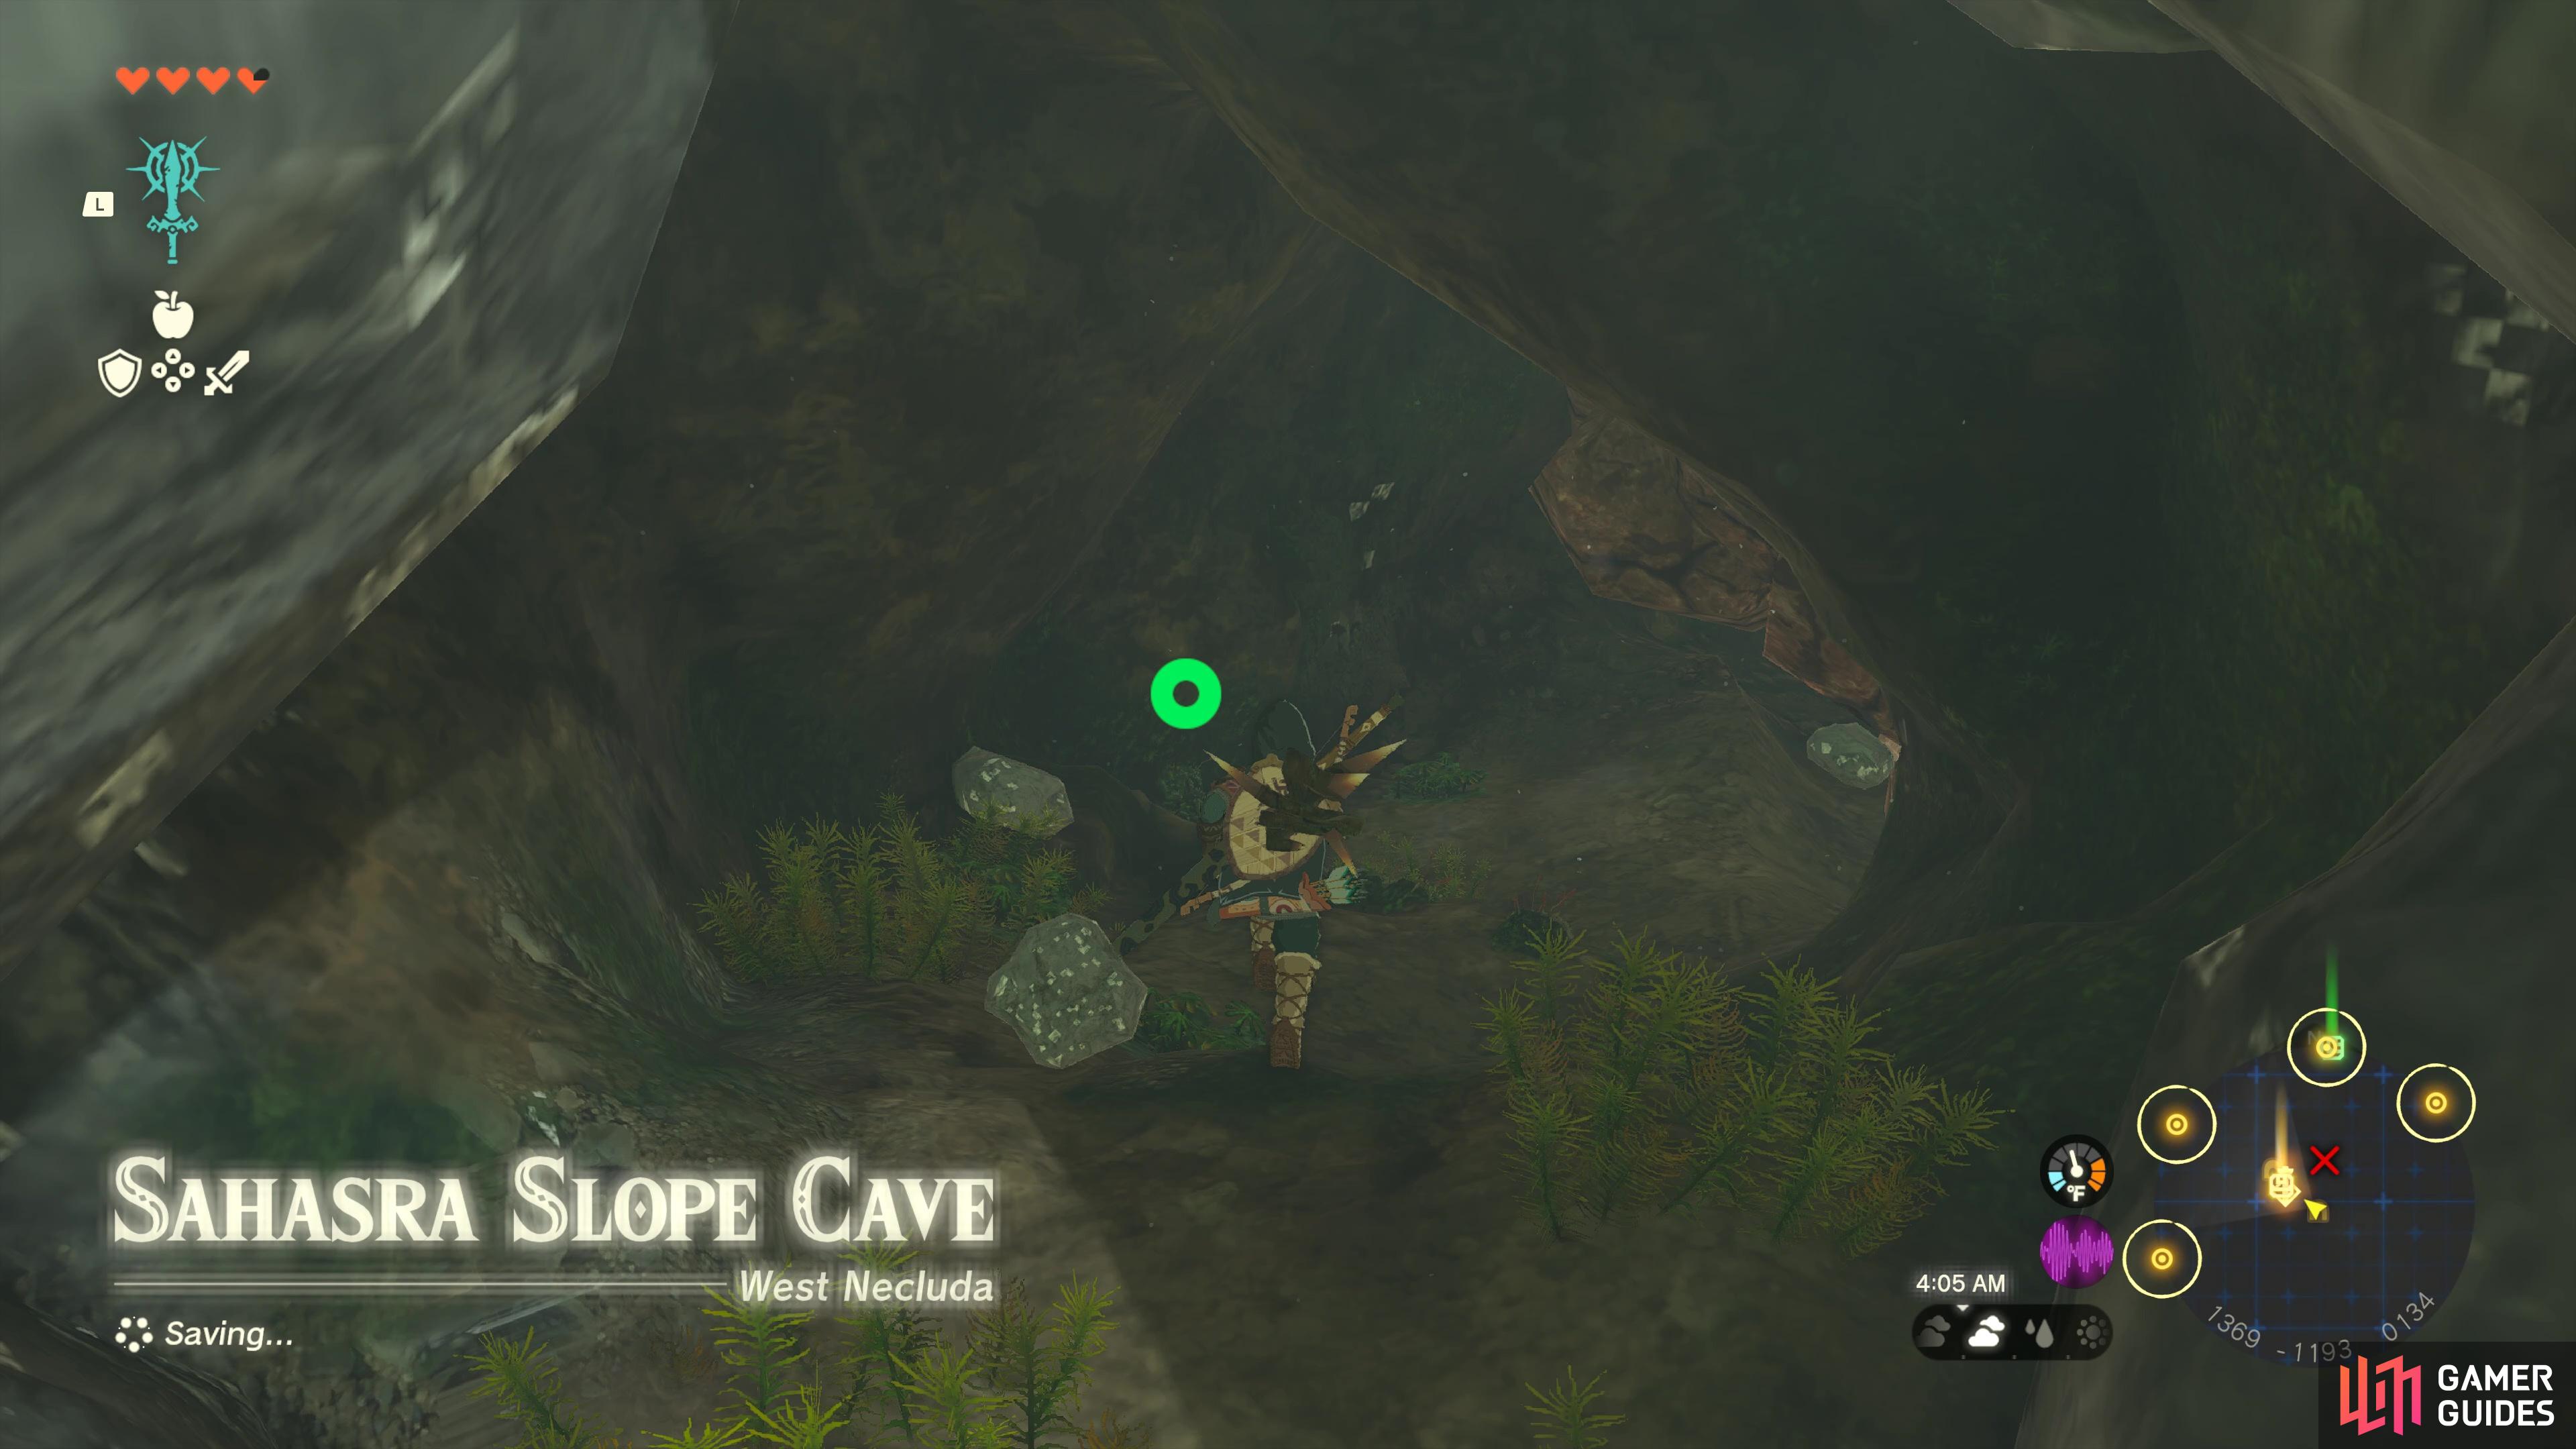 You will need to head into the cave a little to the northwest of the Tower.